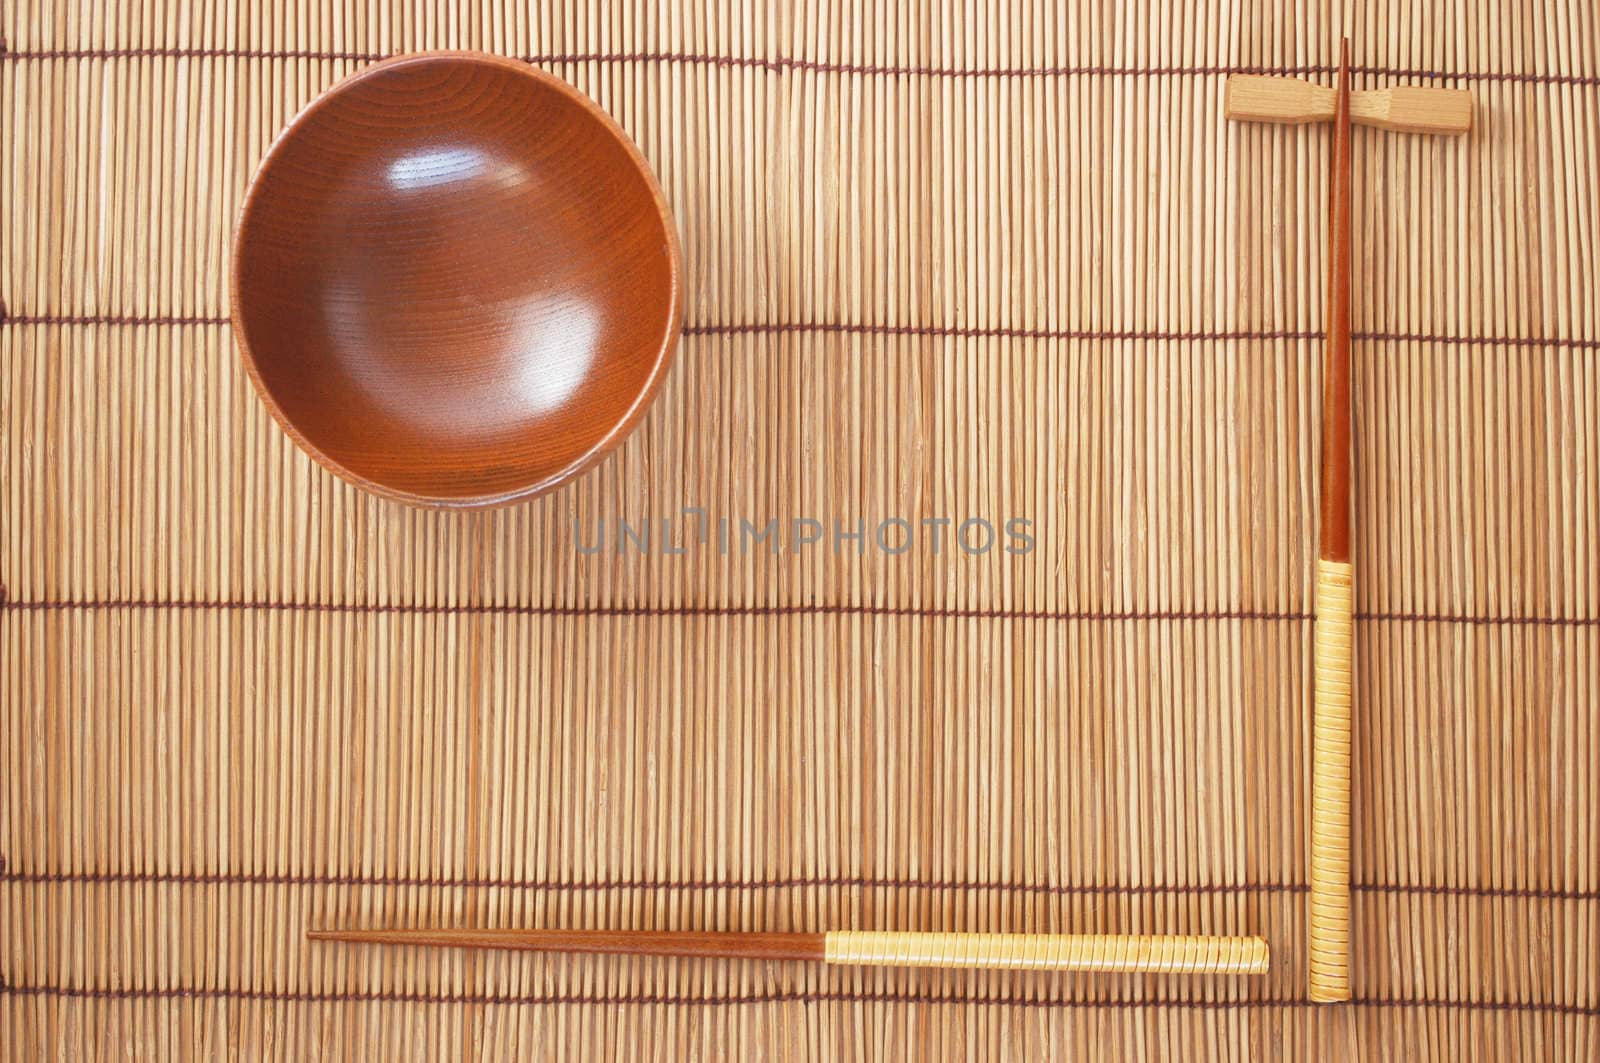 Chopsticks with wooden bowl on bamboo matting background  by svtrotof